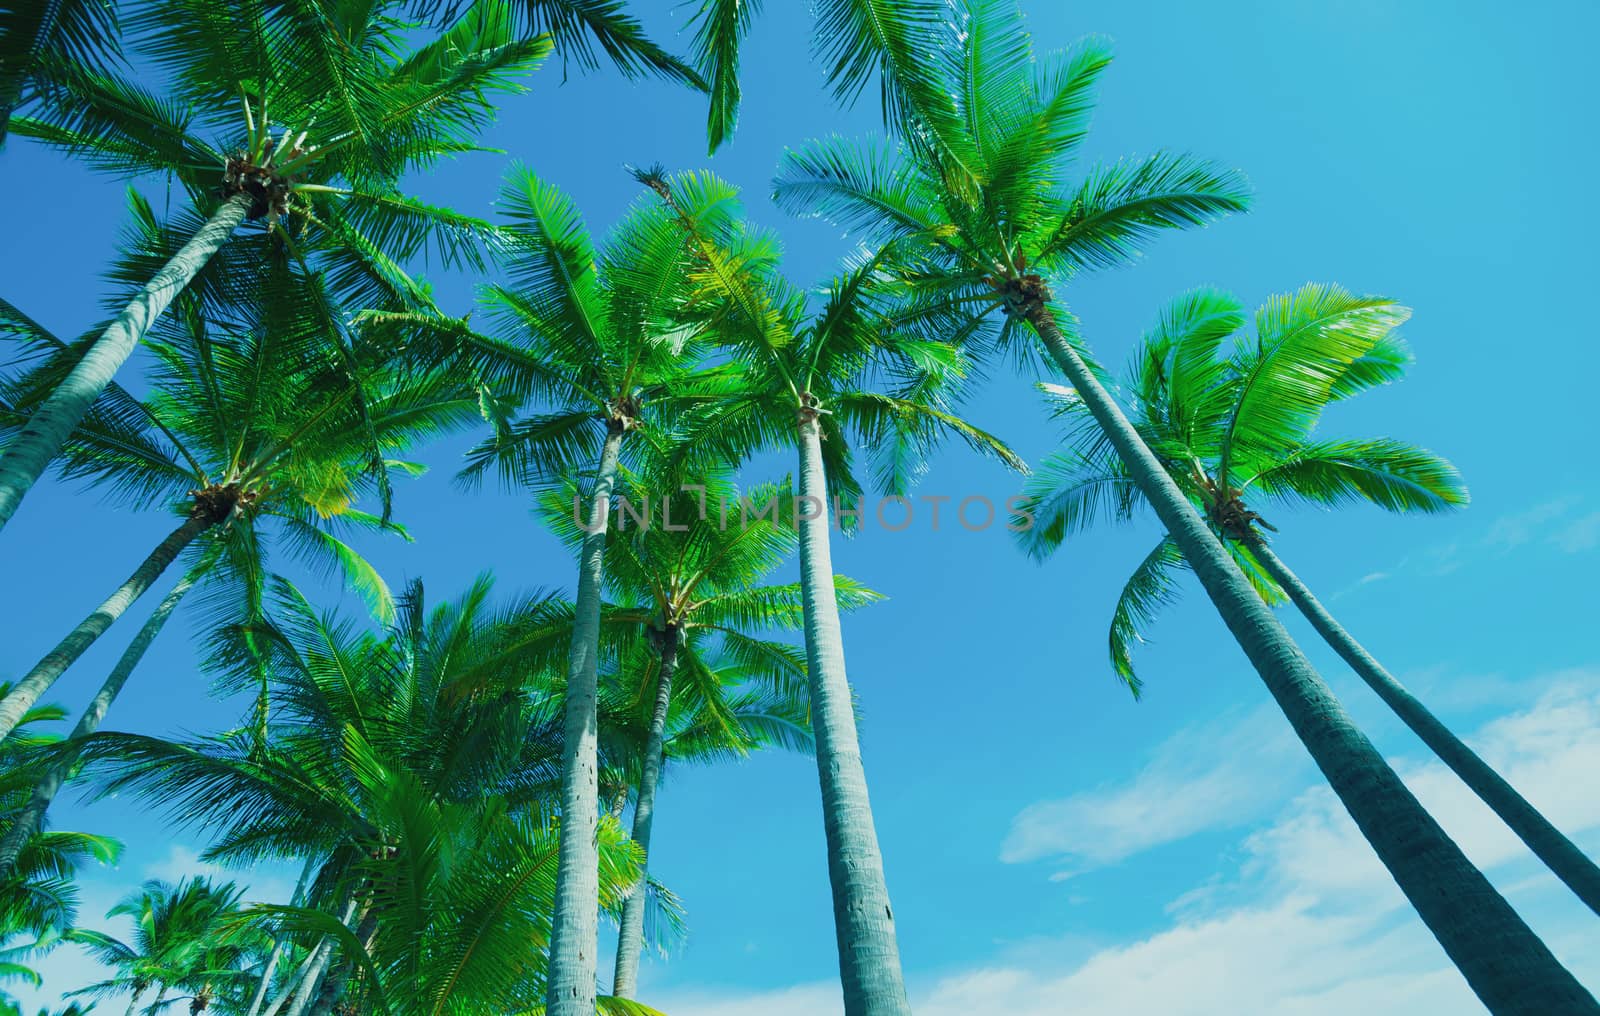 Low angle coconut palm trees. by brians101